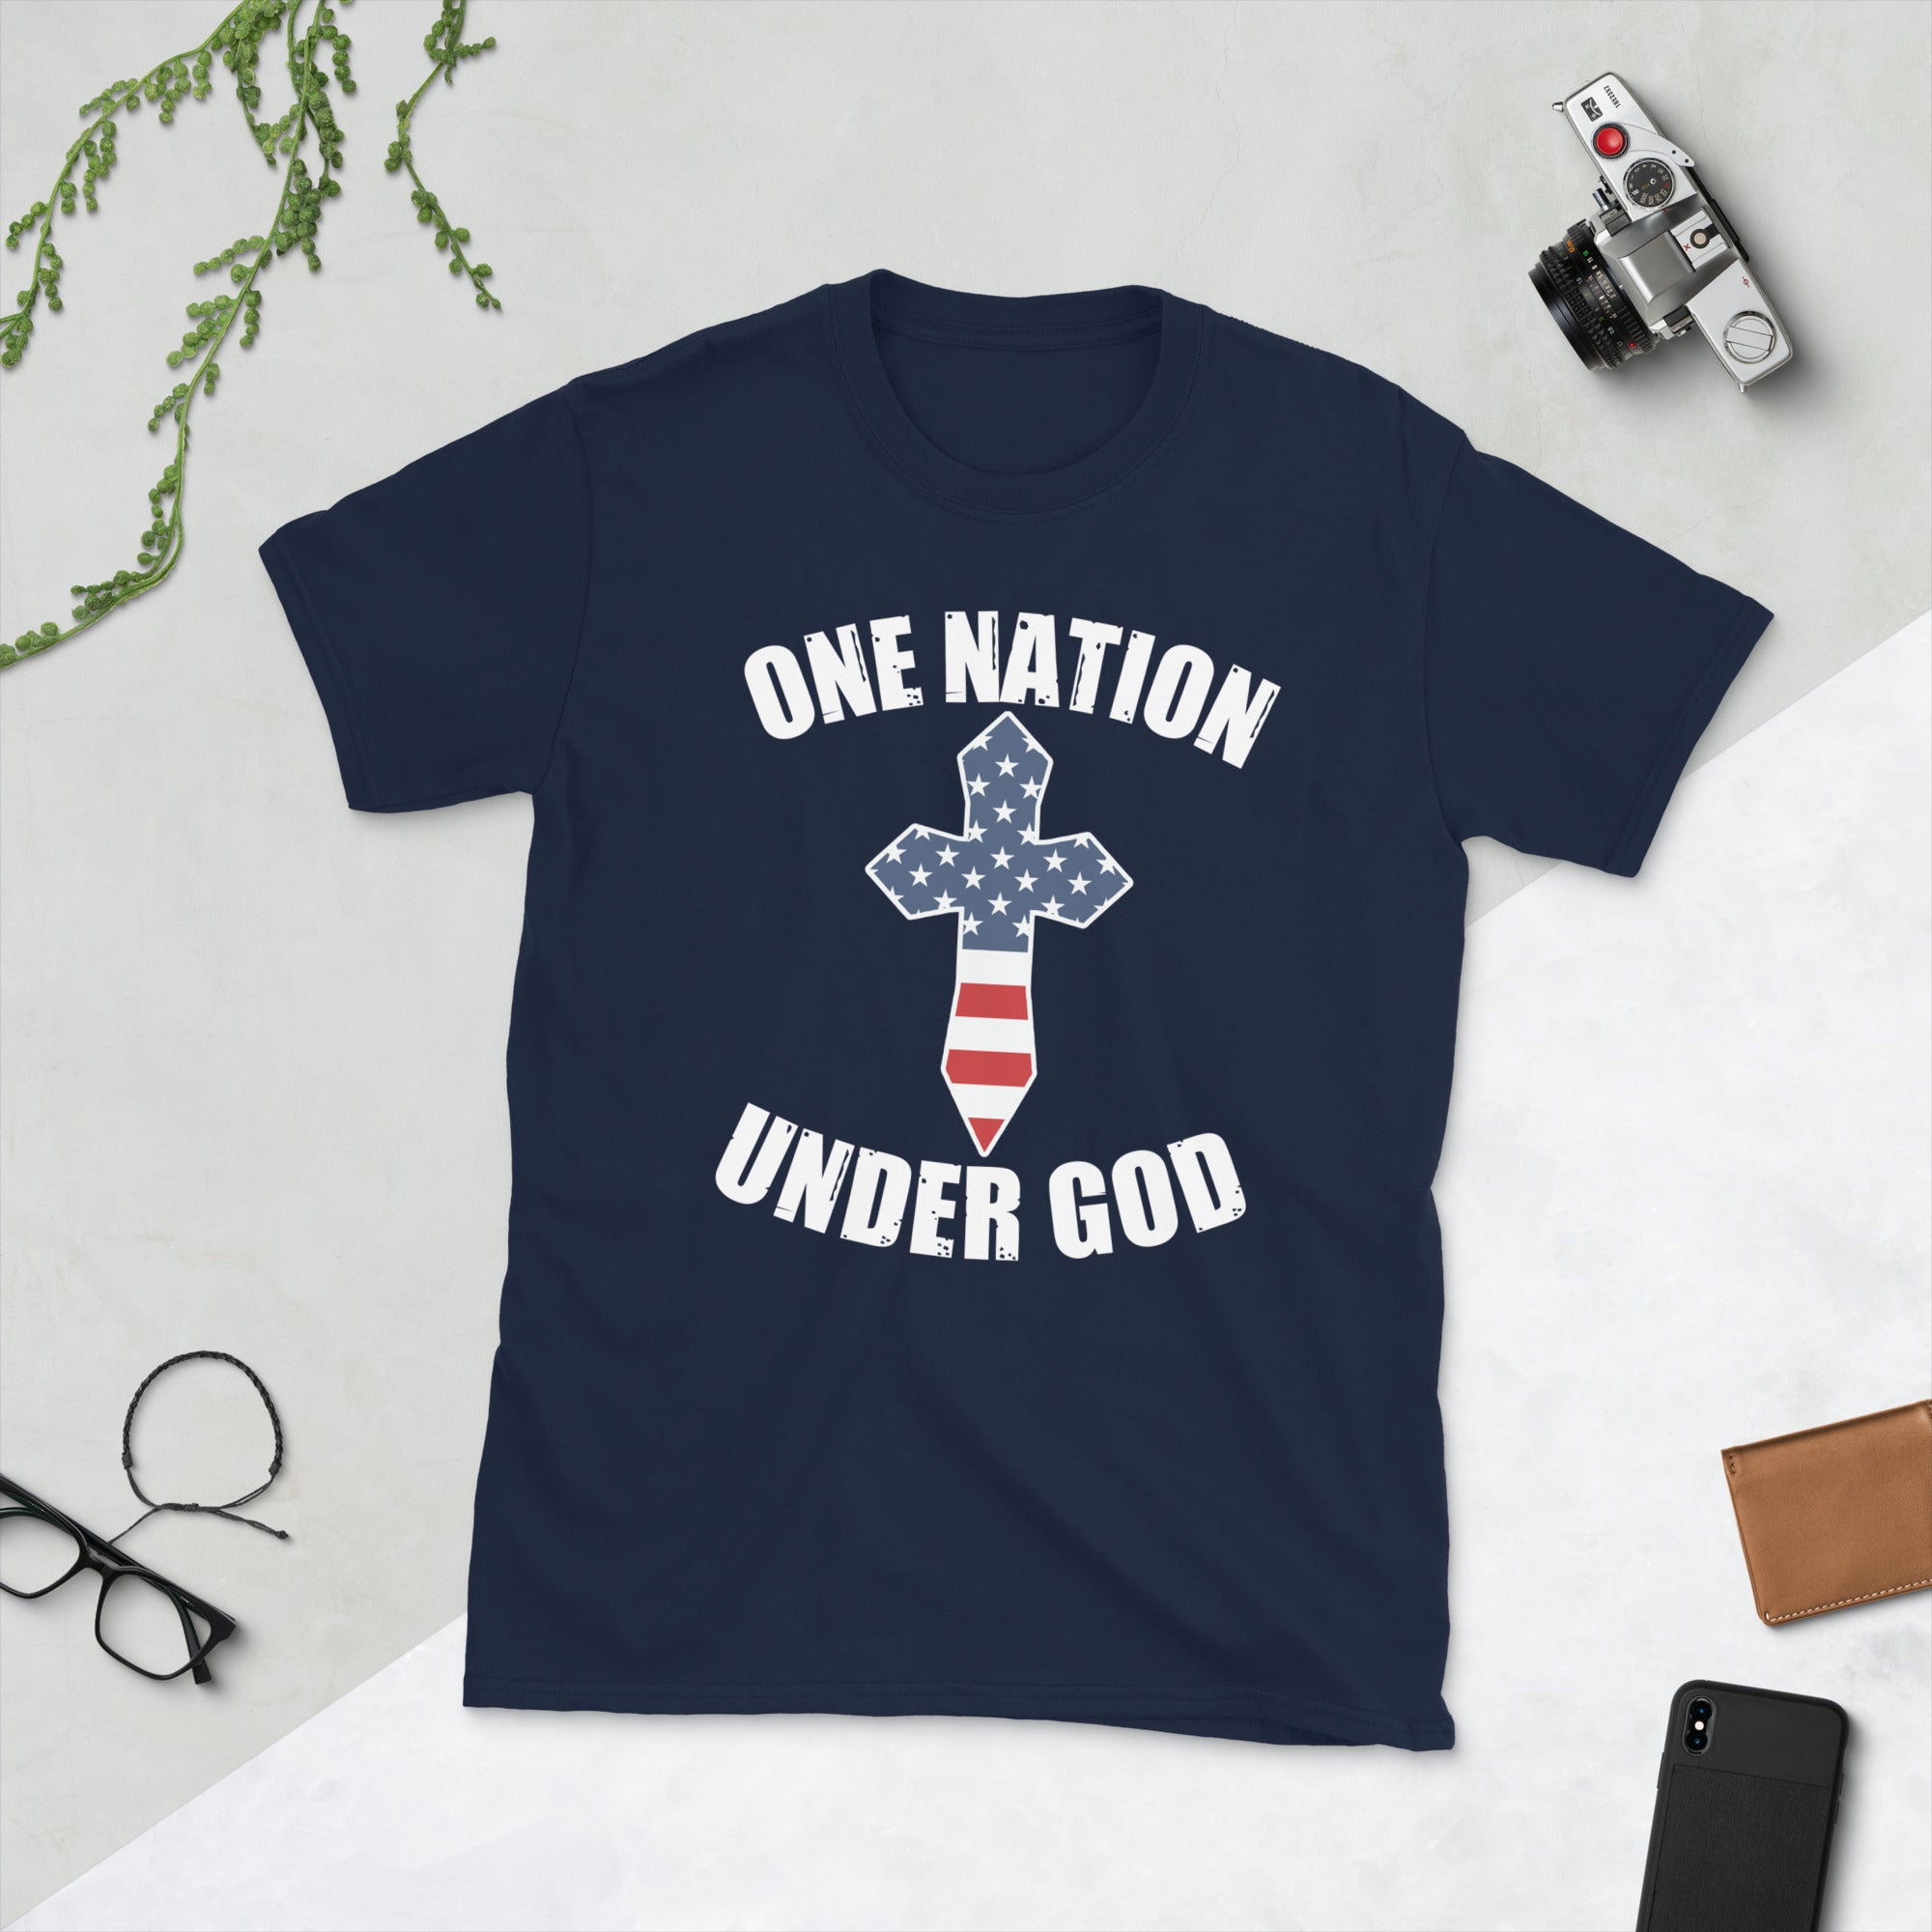 One Nation Under God T-Shirt, Patriotic Gift, Freedom Shirt, Pledge of Allegiance, Conservative Shirt, Proud American Tee, American USA Flag